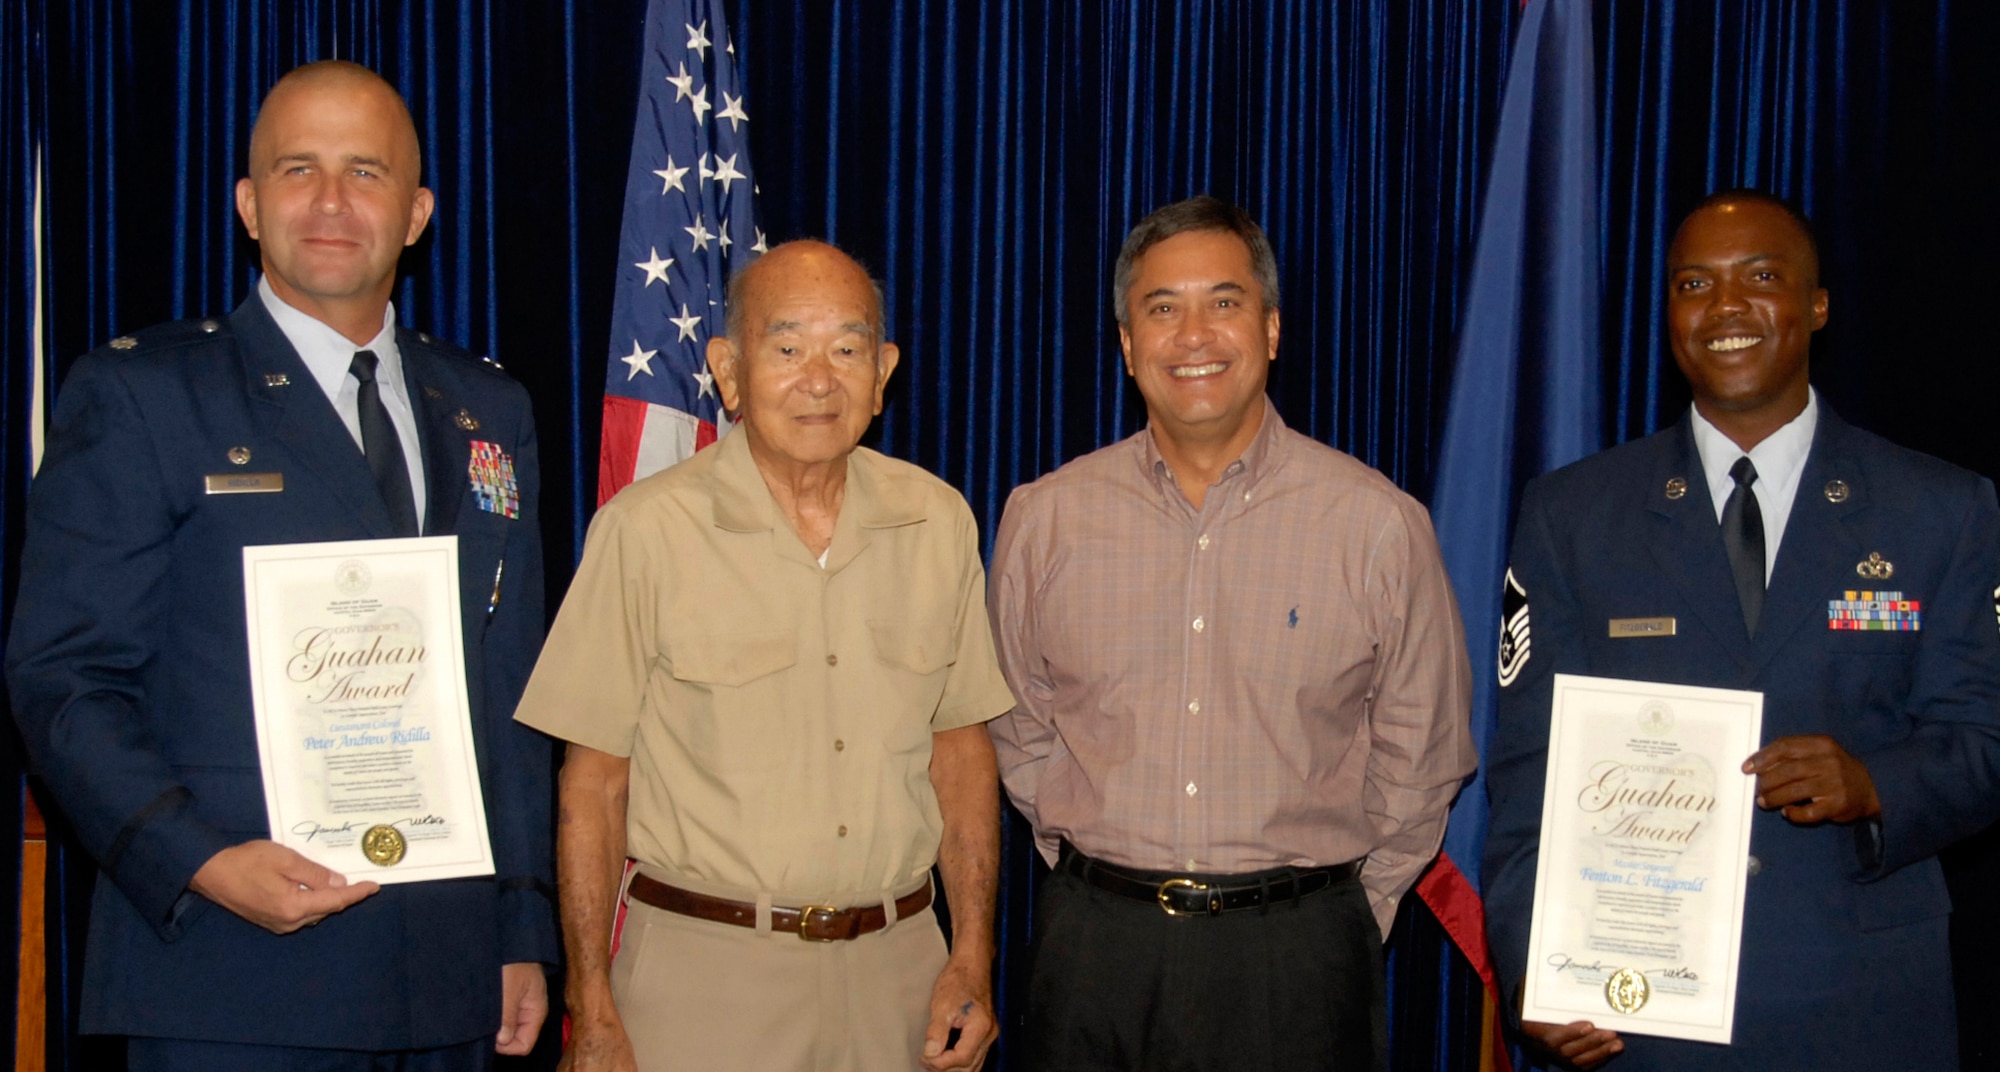 Governor Felix P. Camacho presents Lt. Col. Peter Ridilla, 36th Civil Engineer Squadron commander and Master Sgt. Fenton Fitzgerald, also from the 36th CES, with the Governor's Gauhan Award on March 27 at the Governor's Complex in Haganta. Given by the people of Guam, the award recognizes positive contributions made in communities throughout the island. (U.S. Air Force photo by Airman 1st Class Nichelle Griffiths)